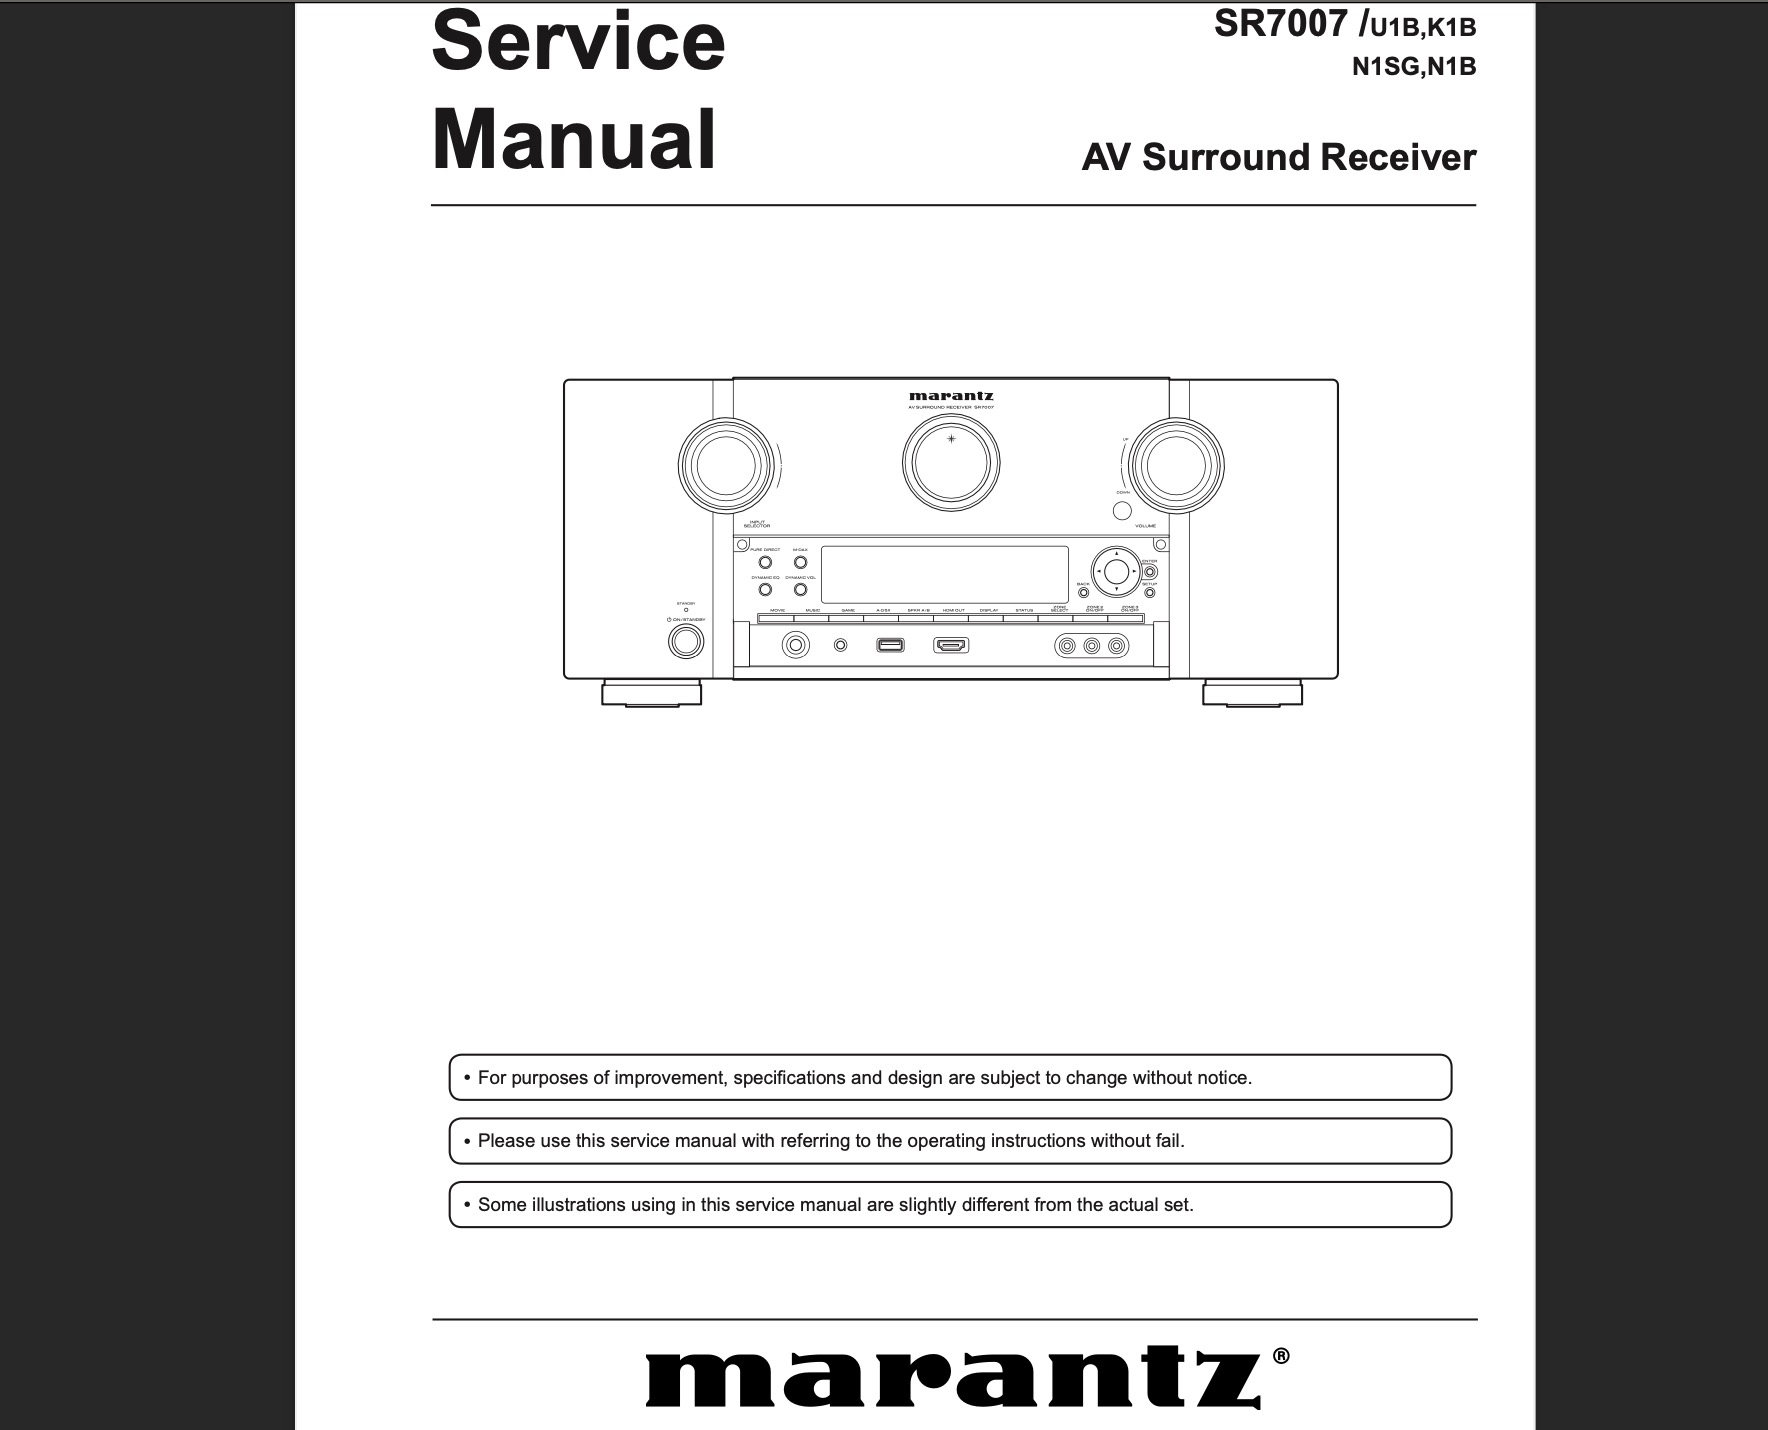 Marantz SR7007 Surround Receiver Service Manual, Parts List, Exploded View, Wiring and Schematic Diagram